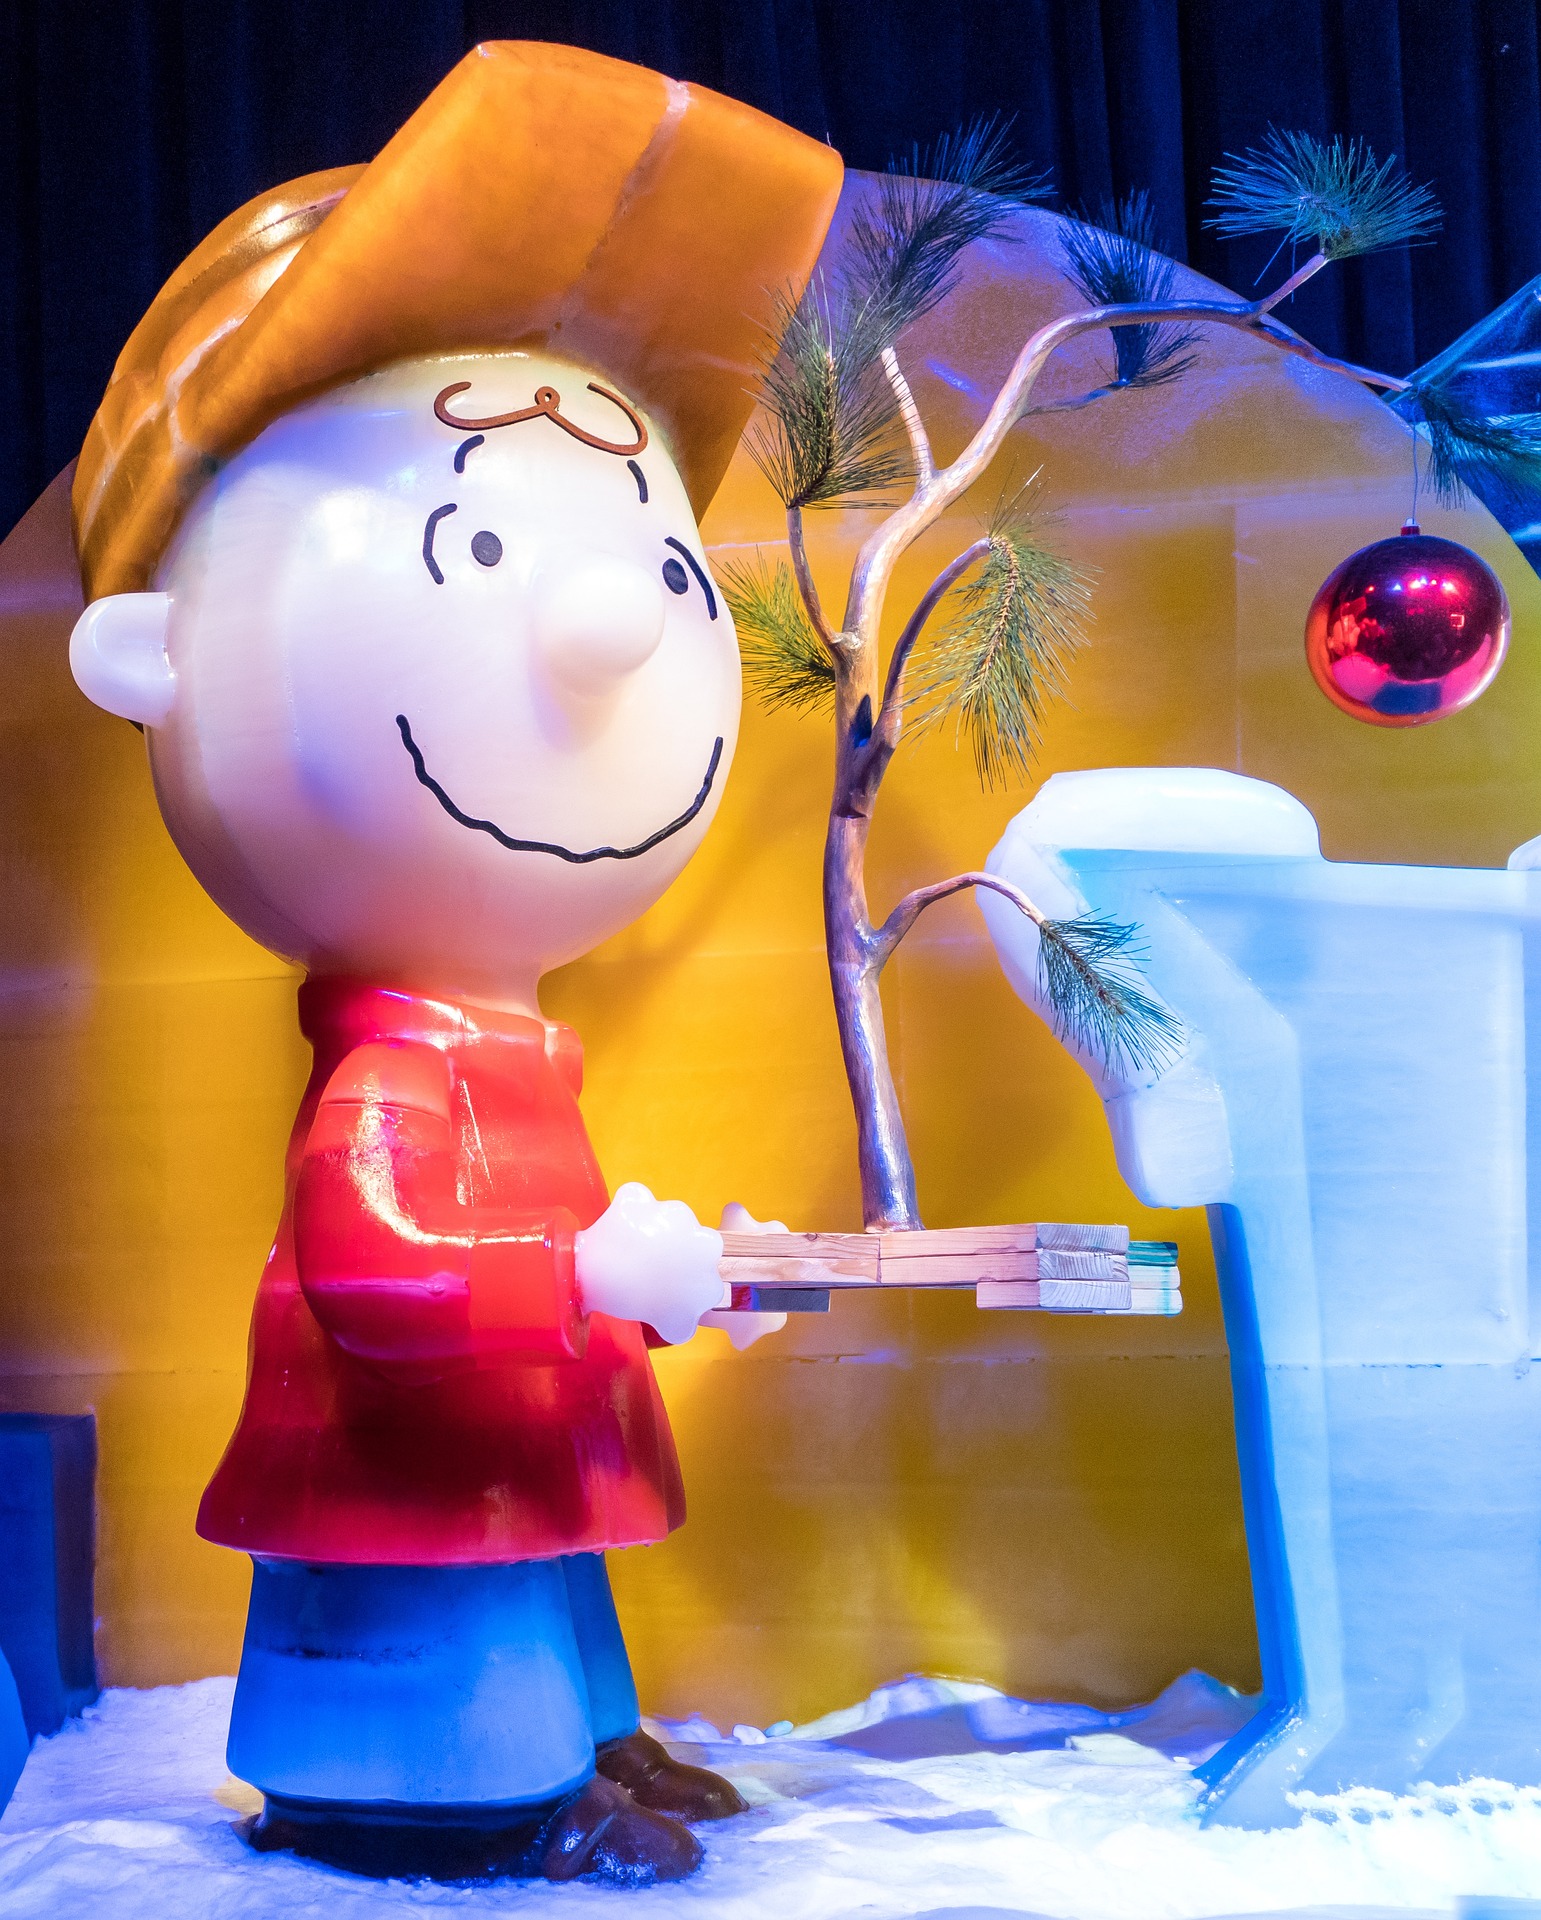 Ice sculpture of Charlie Brown with a Charlie Brown Christmas Tree